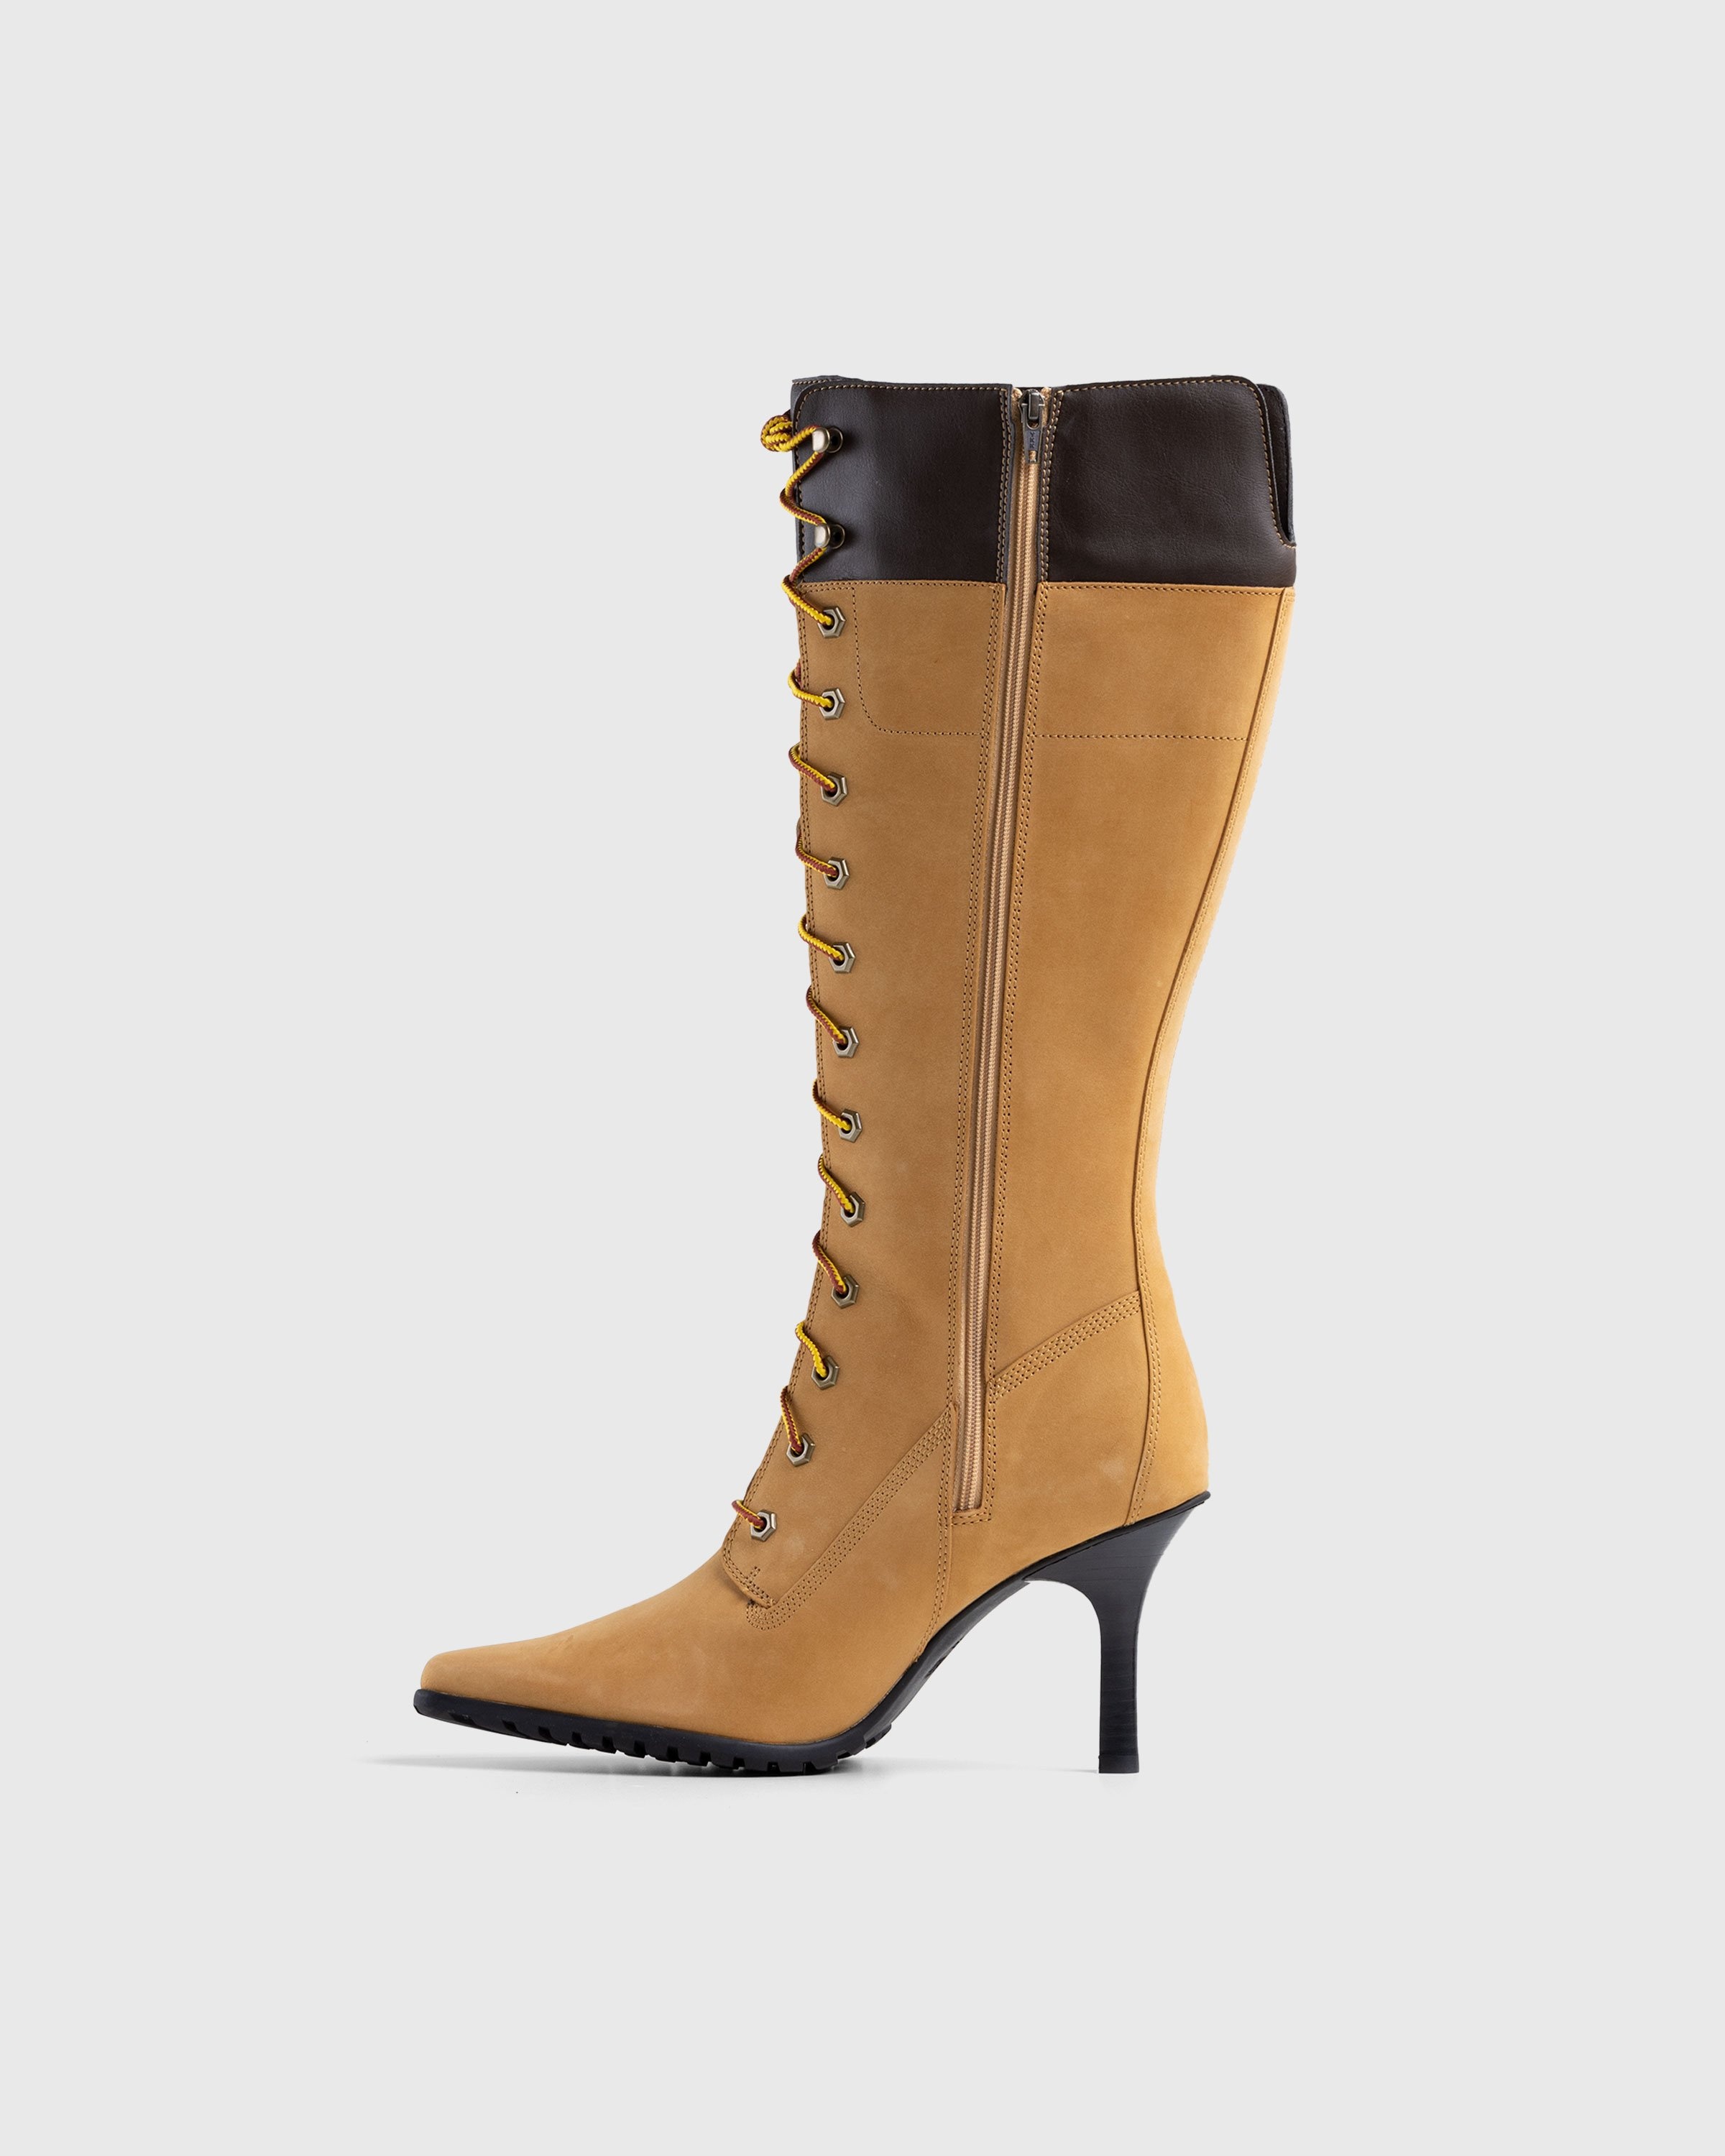 Veneda Carter x Timberland – Tall Lace Boot Yellow - Boots - Brown - Image 5